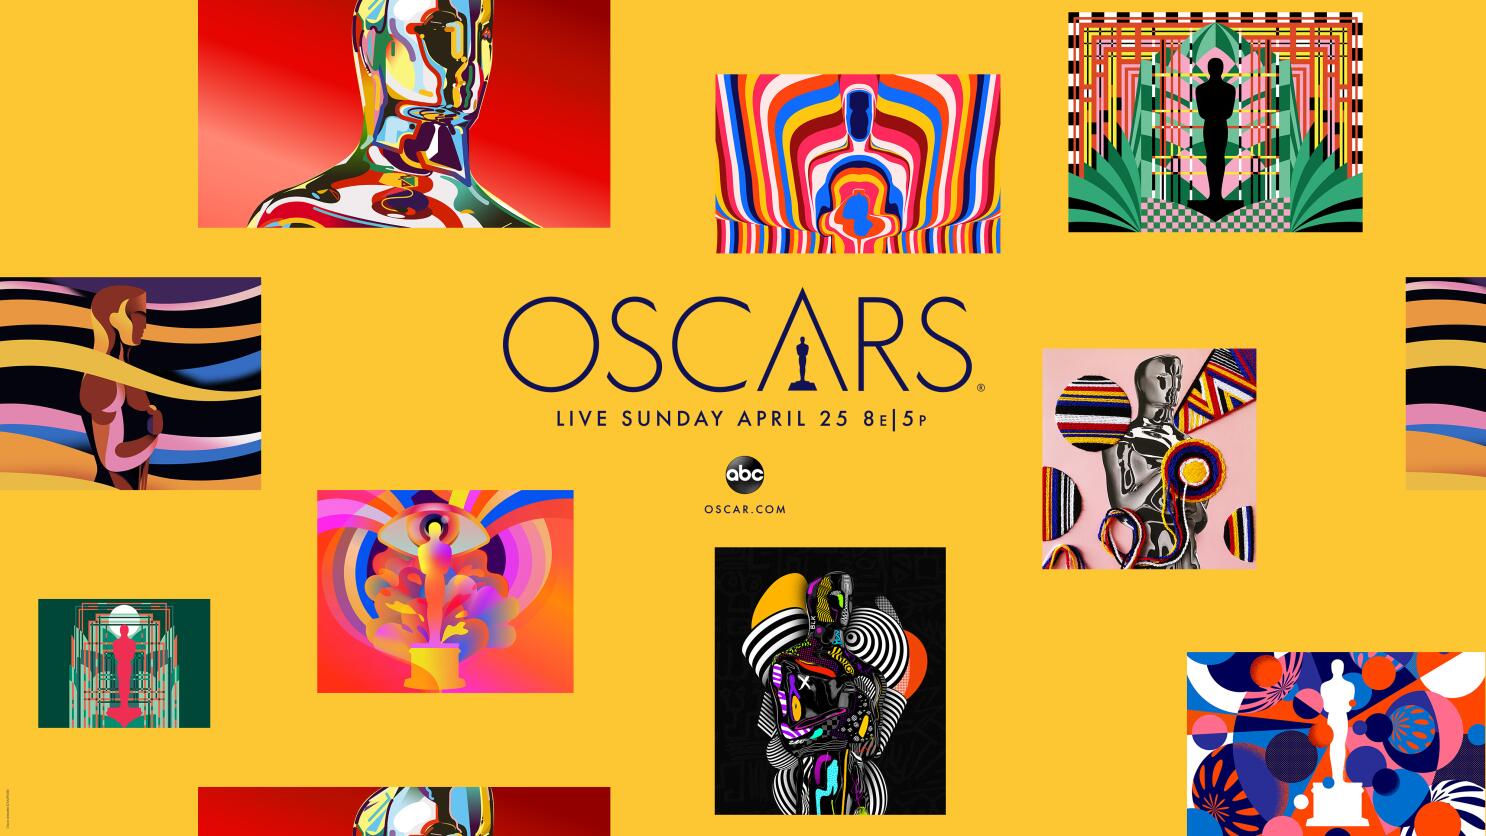 Oscars artwork includes the L.A. work of Michelle Robinson - Los